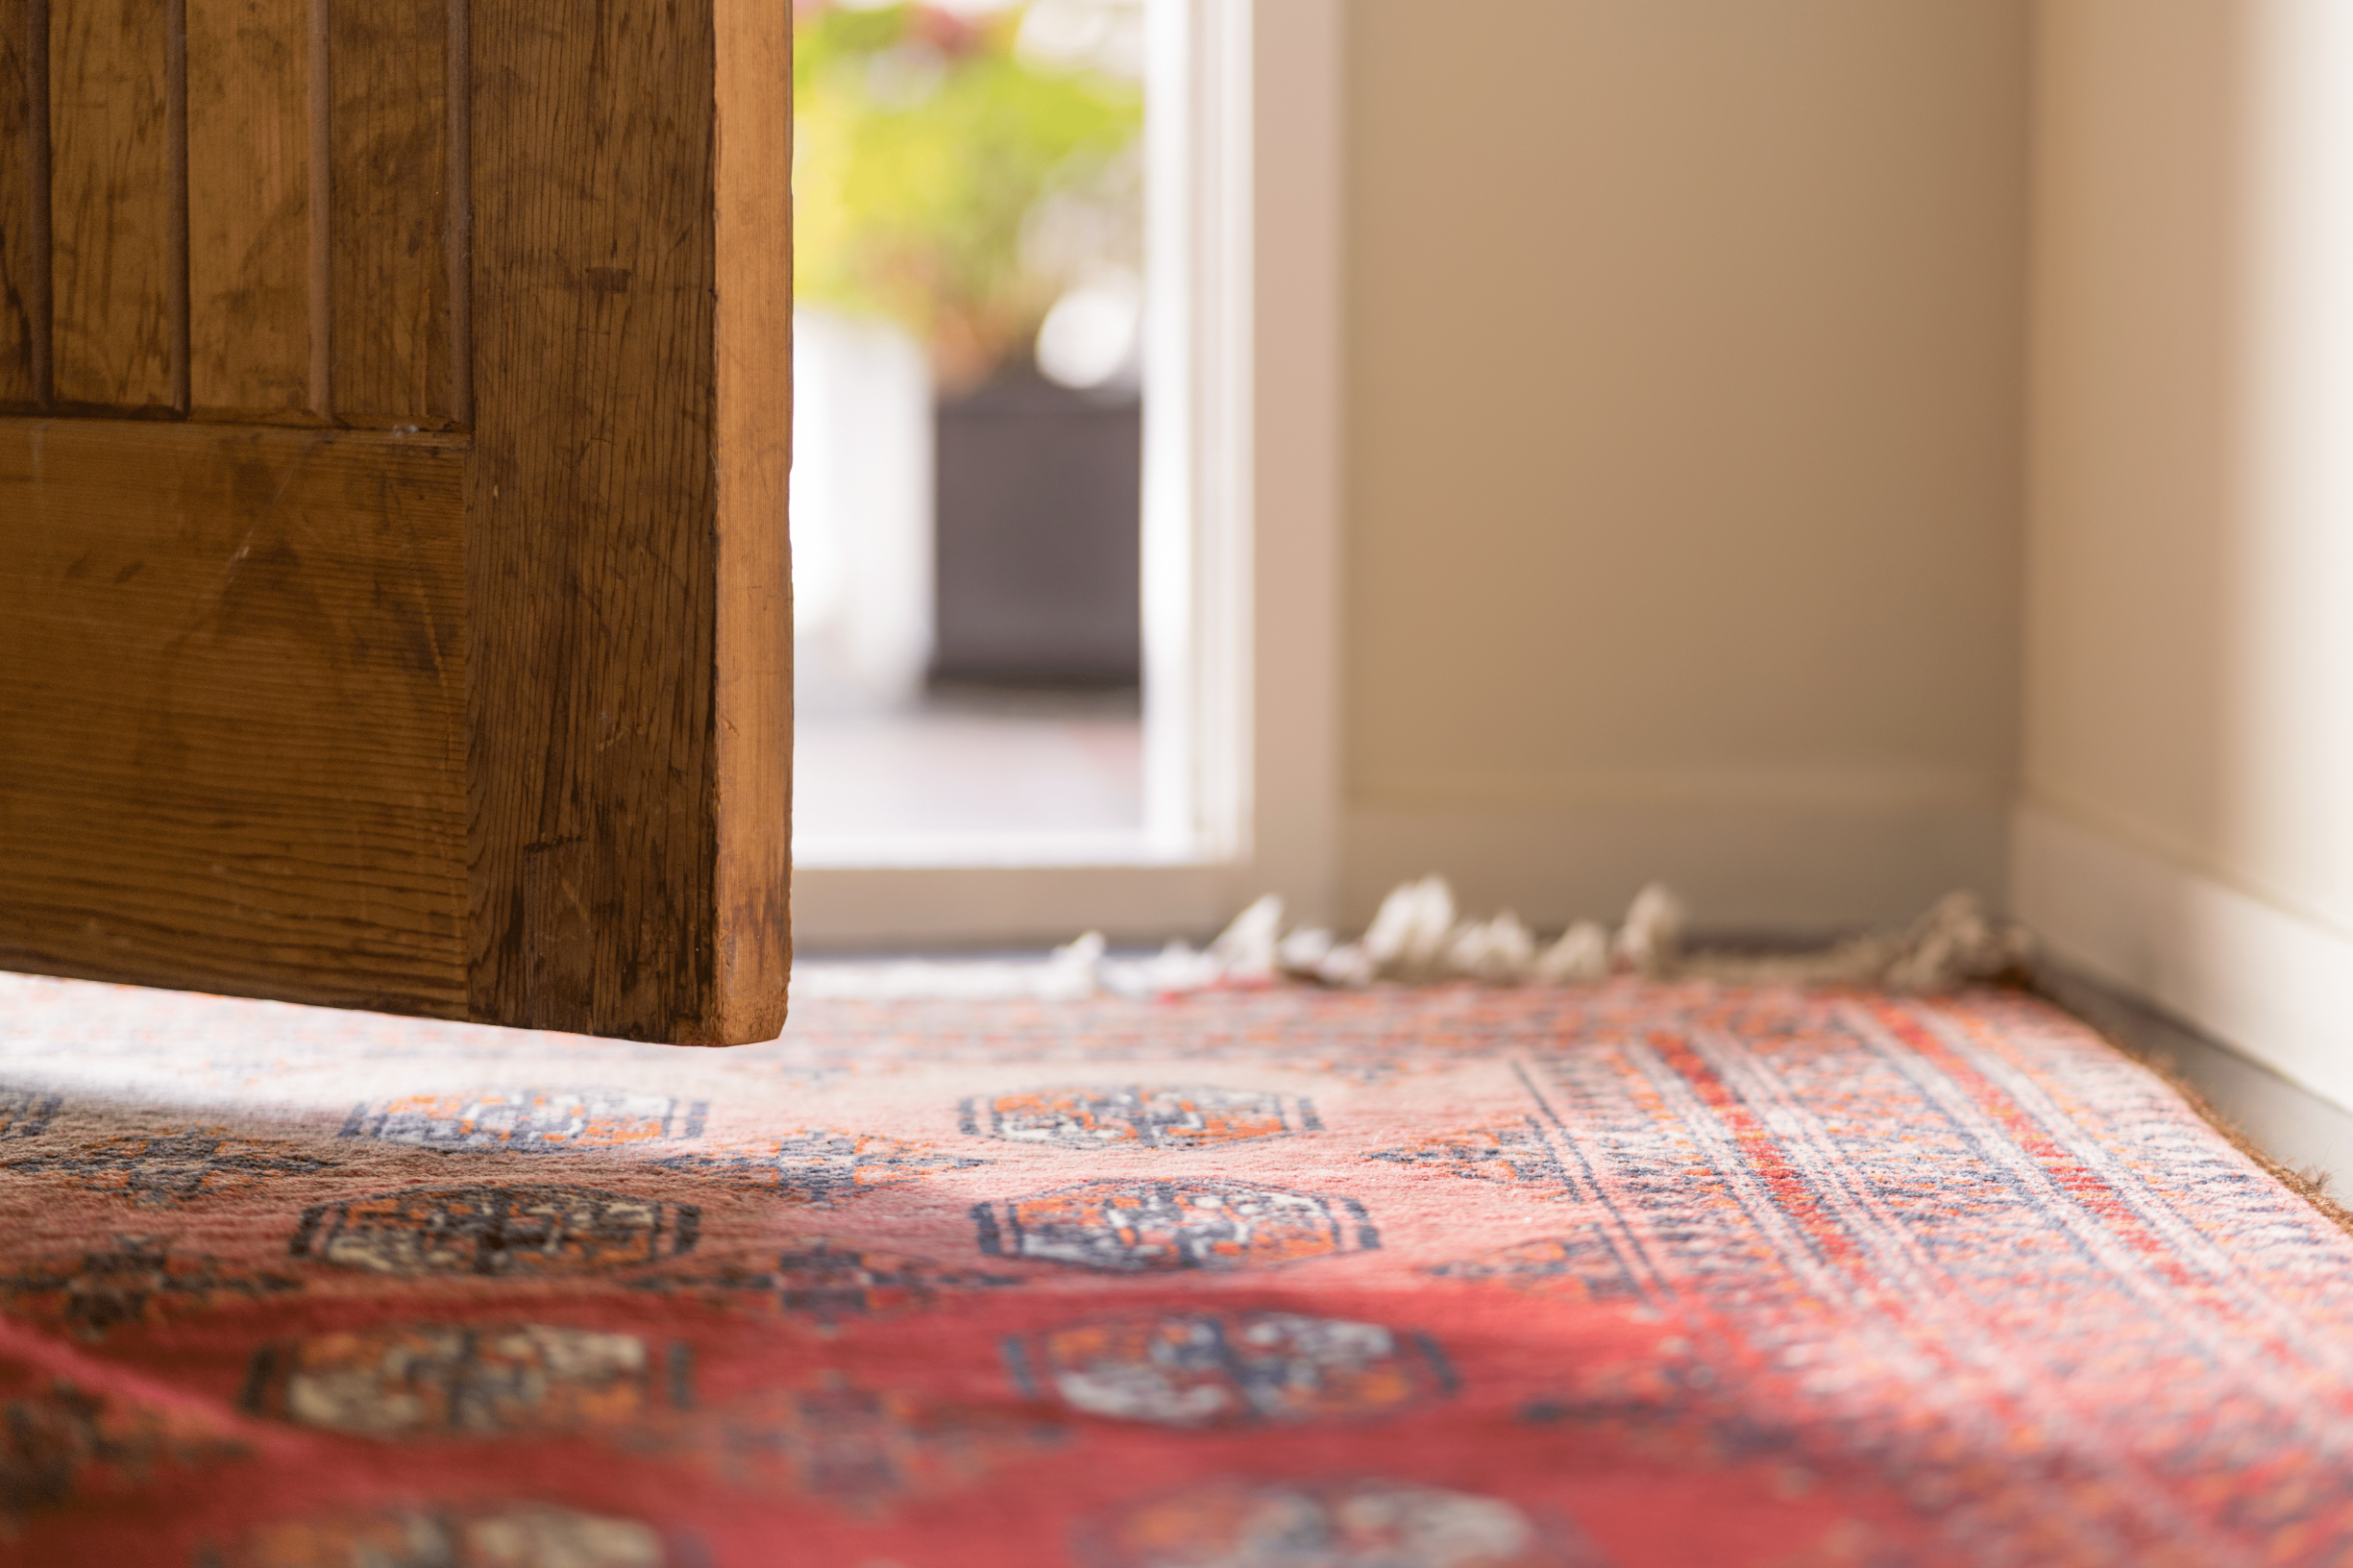 How to Clean your Rugs at Home